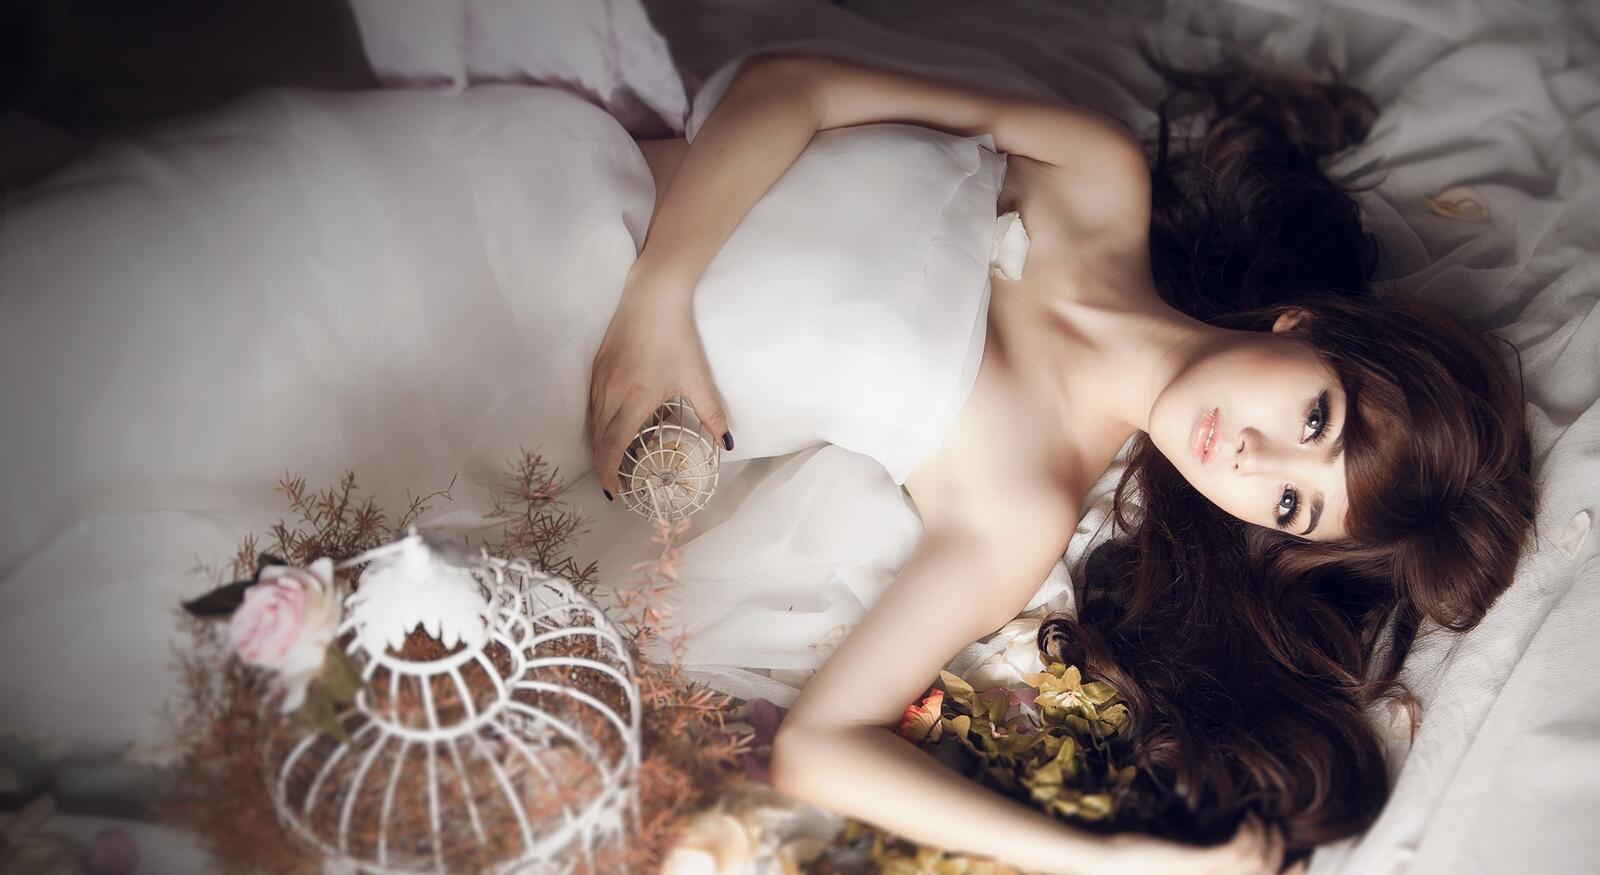 Free photo An Asian girl in a white wedding dress lies on the bed